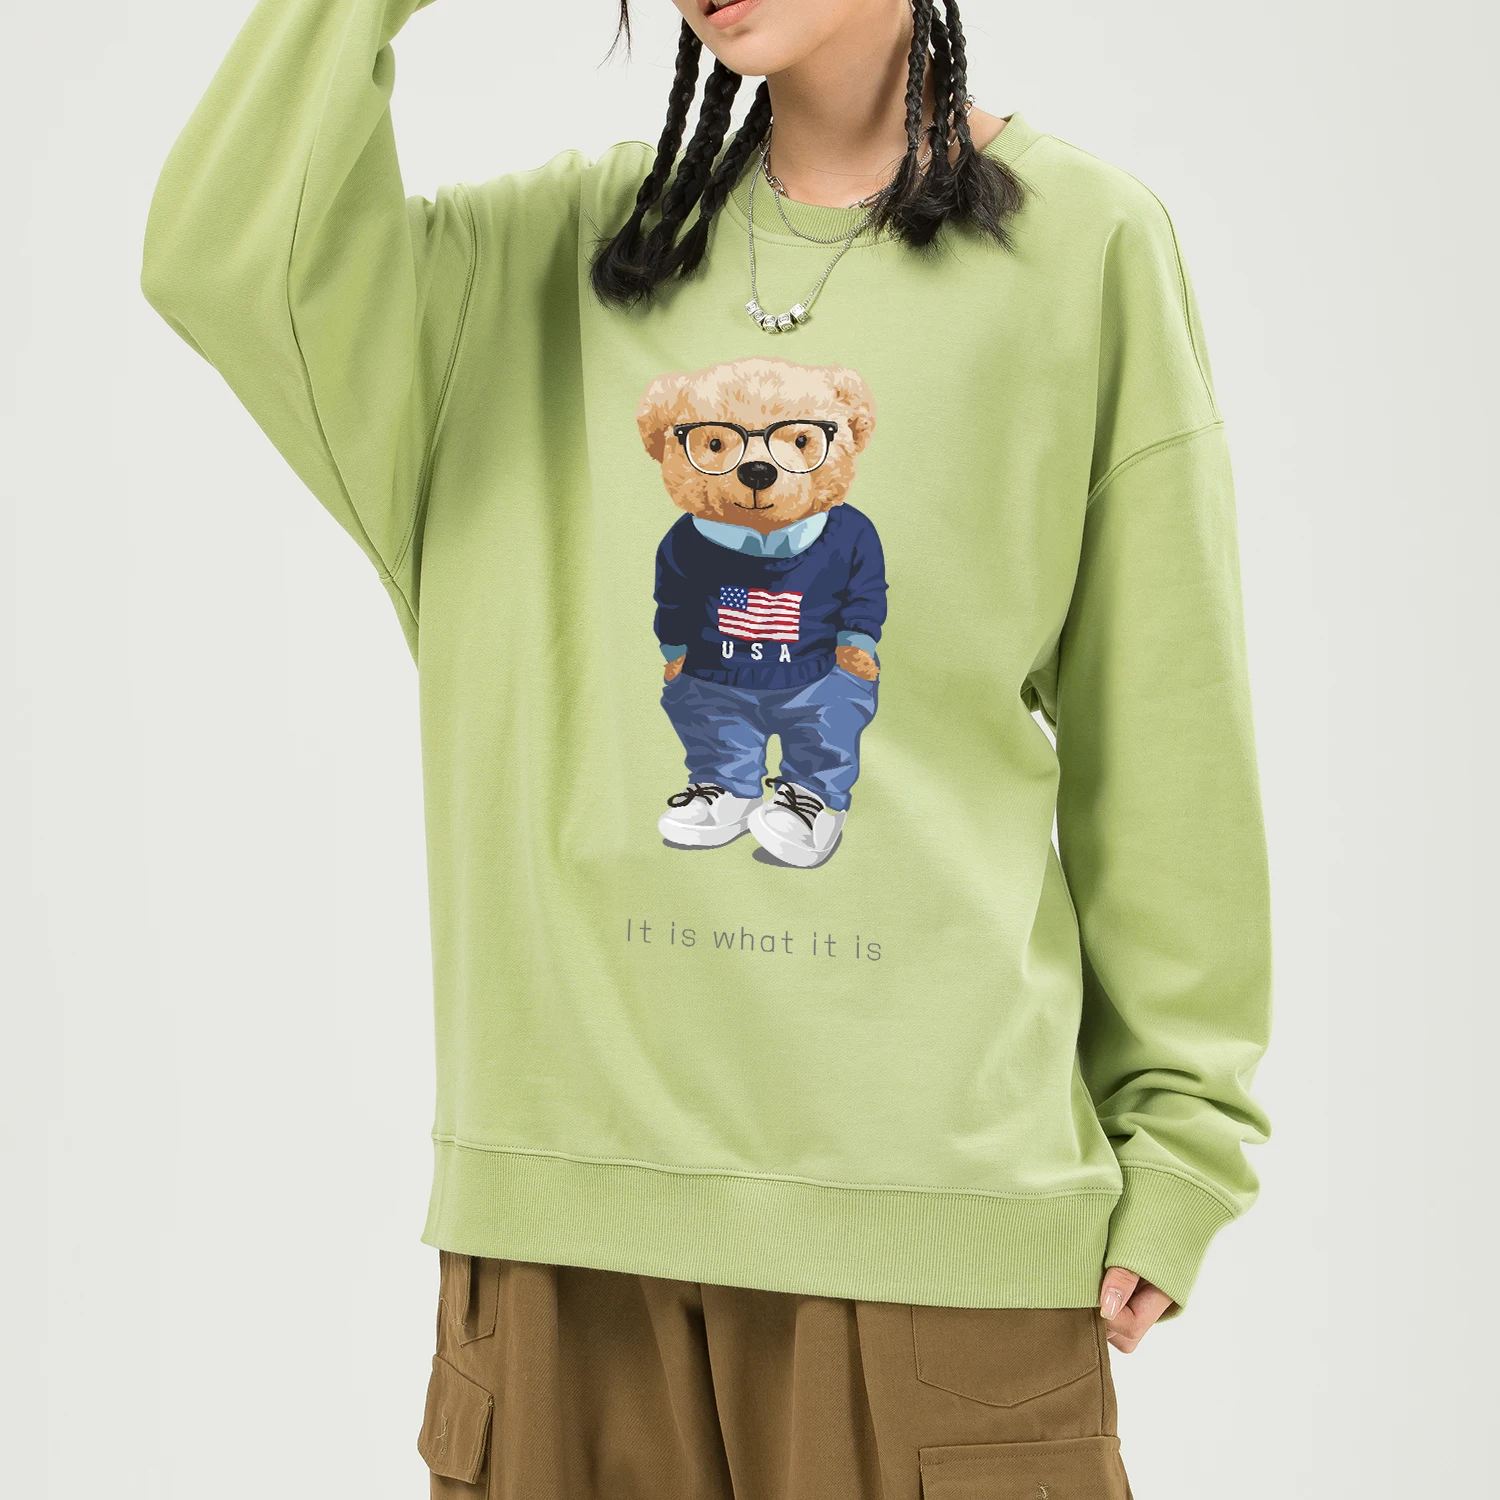 

BLINGPAW Cotton Terry Round Neck Sweatshirt with Teddy Bear Print Unisex Soft and Breathable Perfect for Spring and Autumn